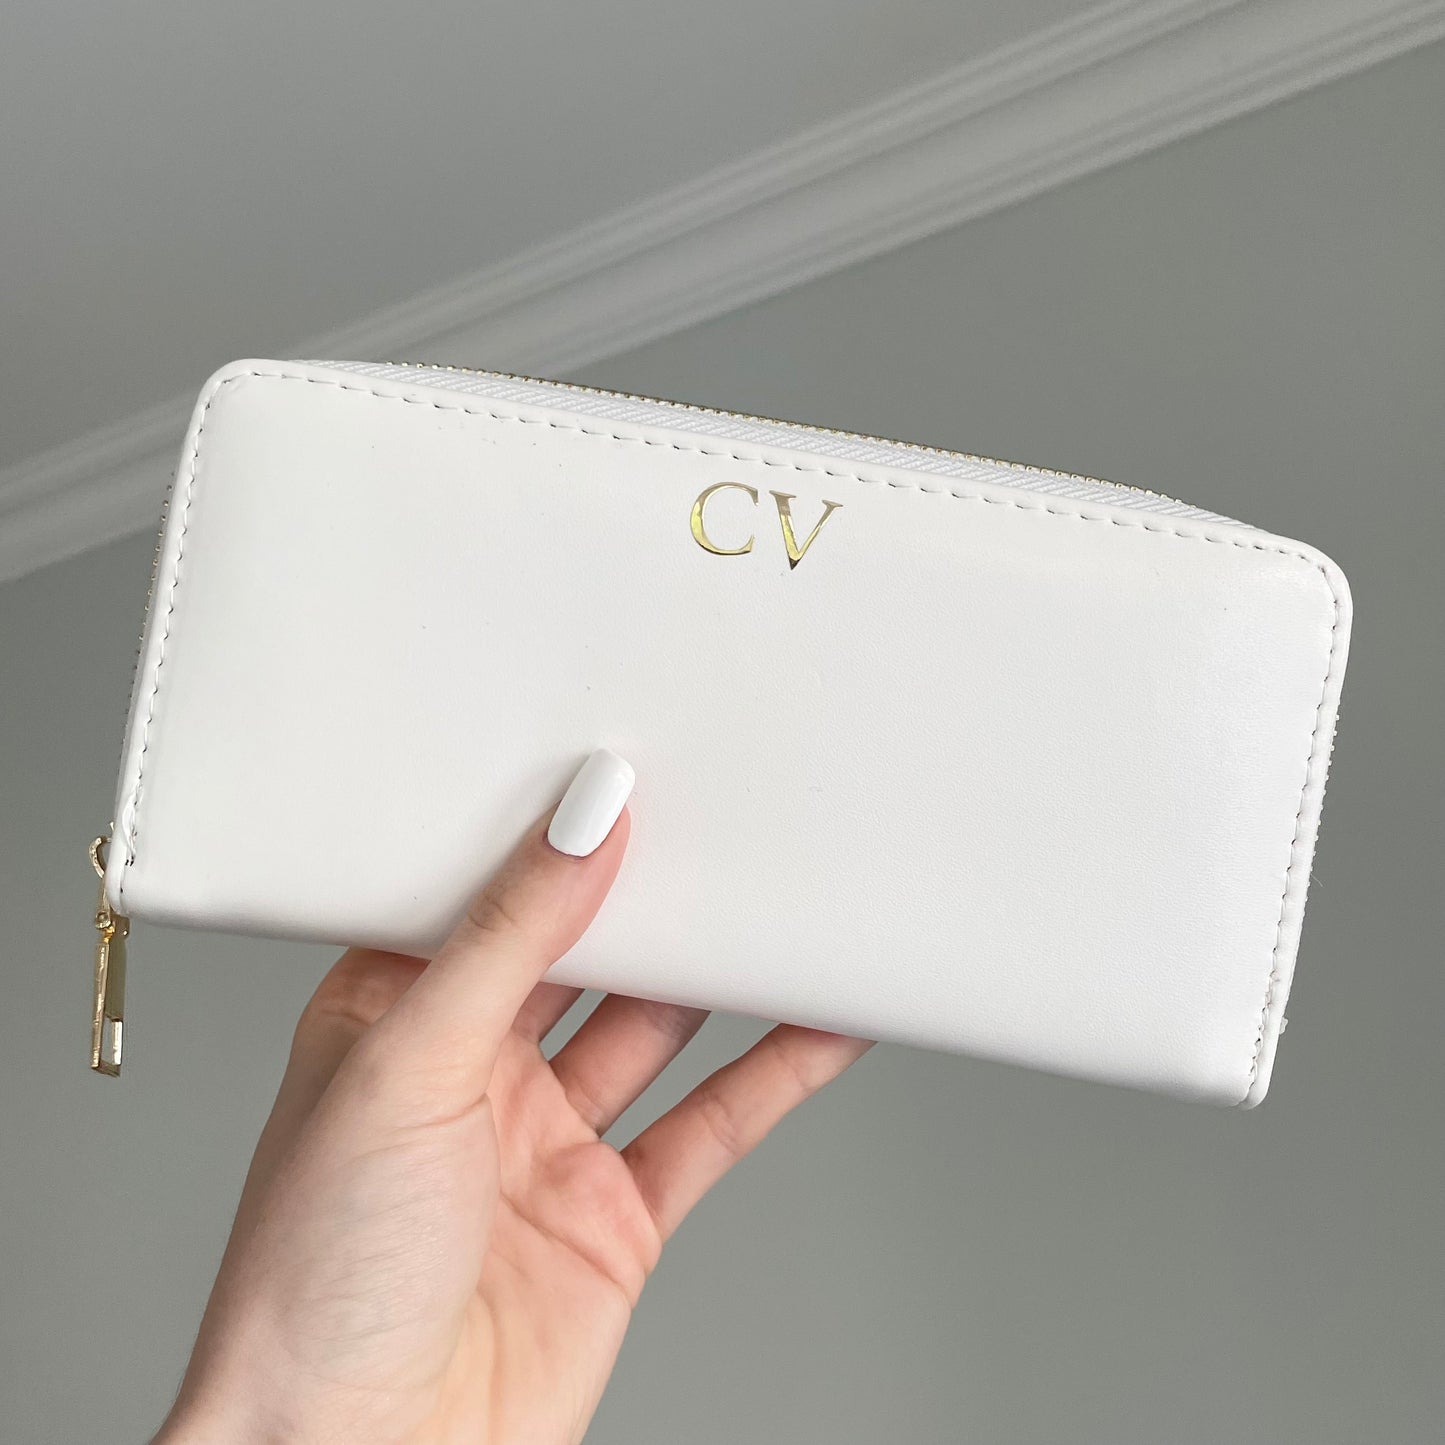 Personalised White Faux Leather Zip Around Purse Wallet Card Holder